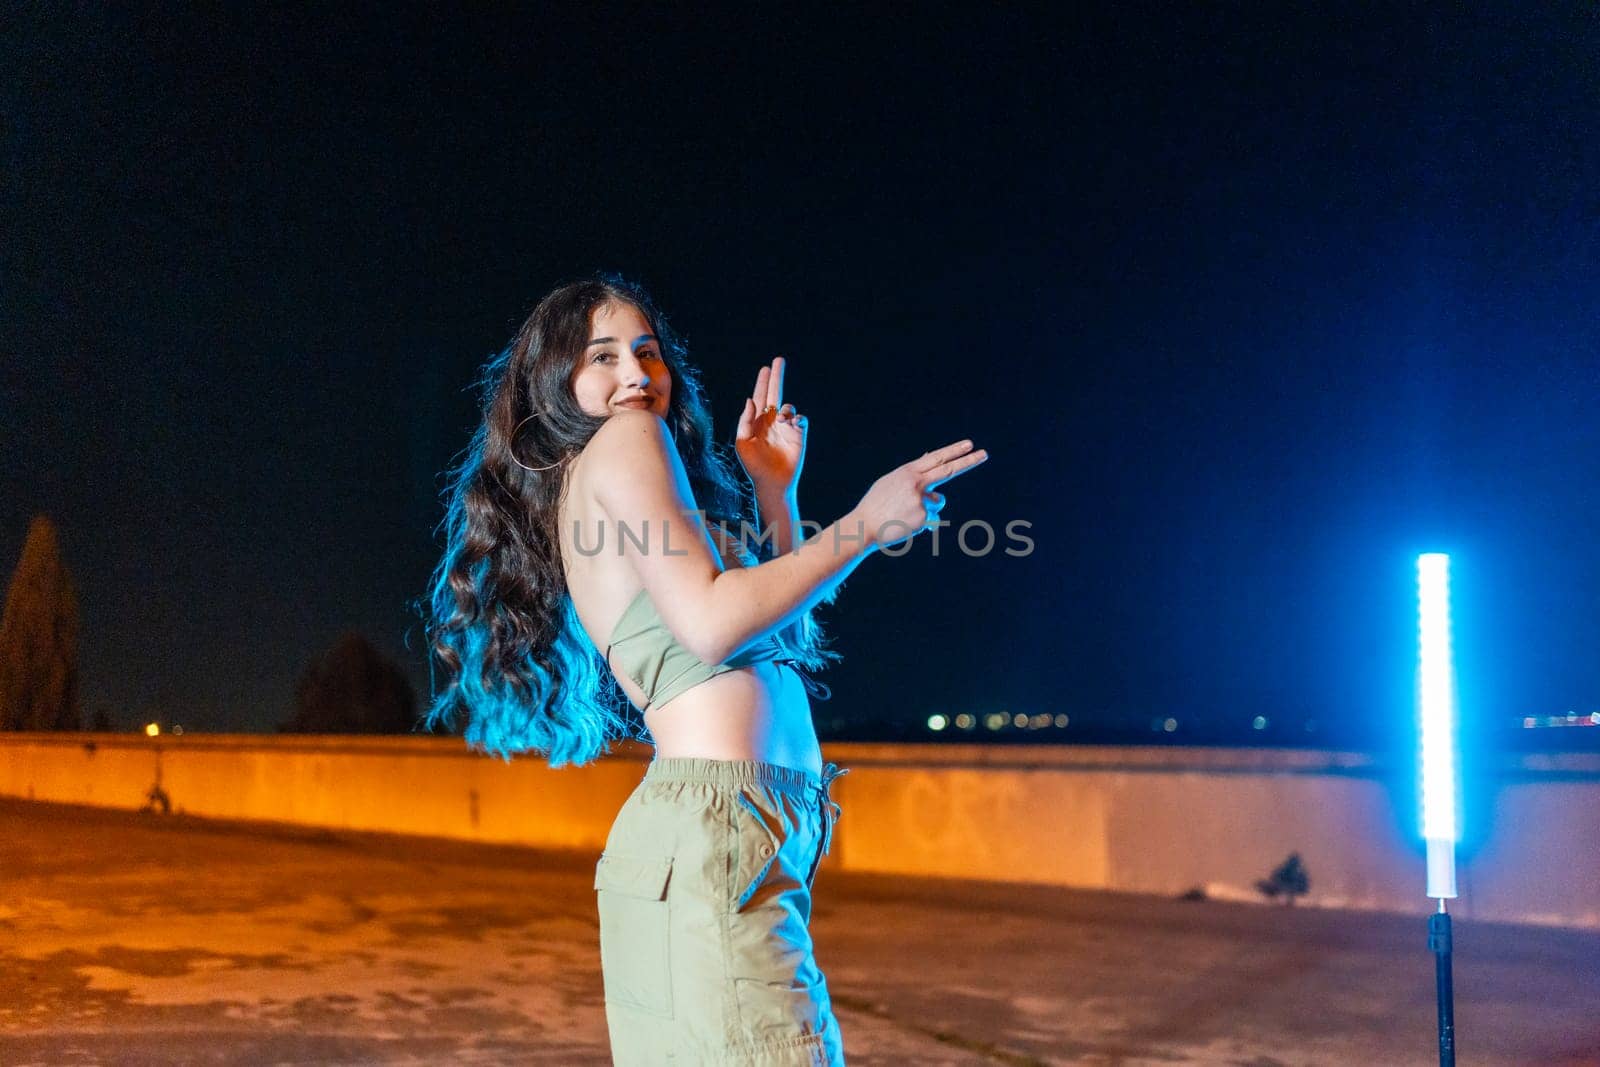 Happy woman dance freestyle hip hop music in the street at night surrounded by neon lights